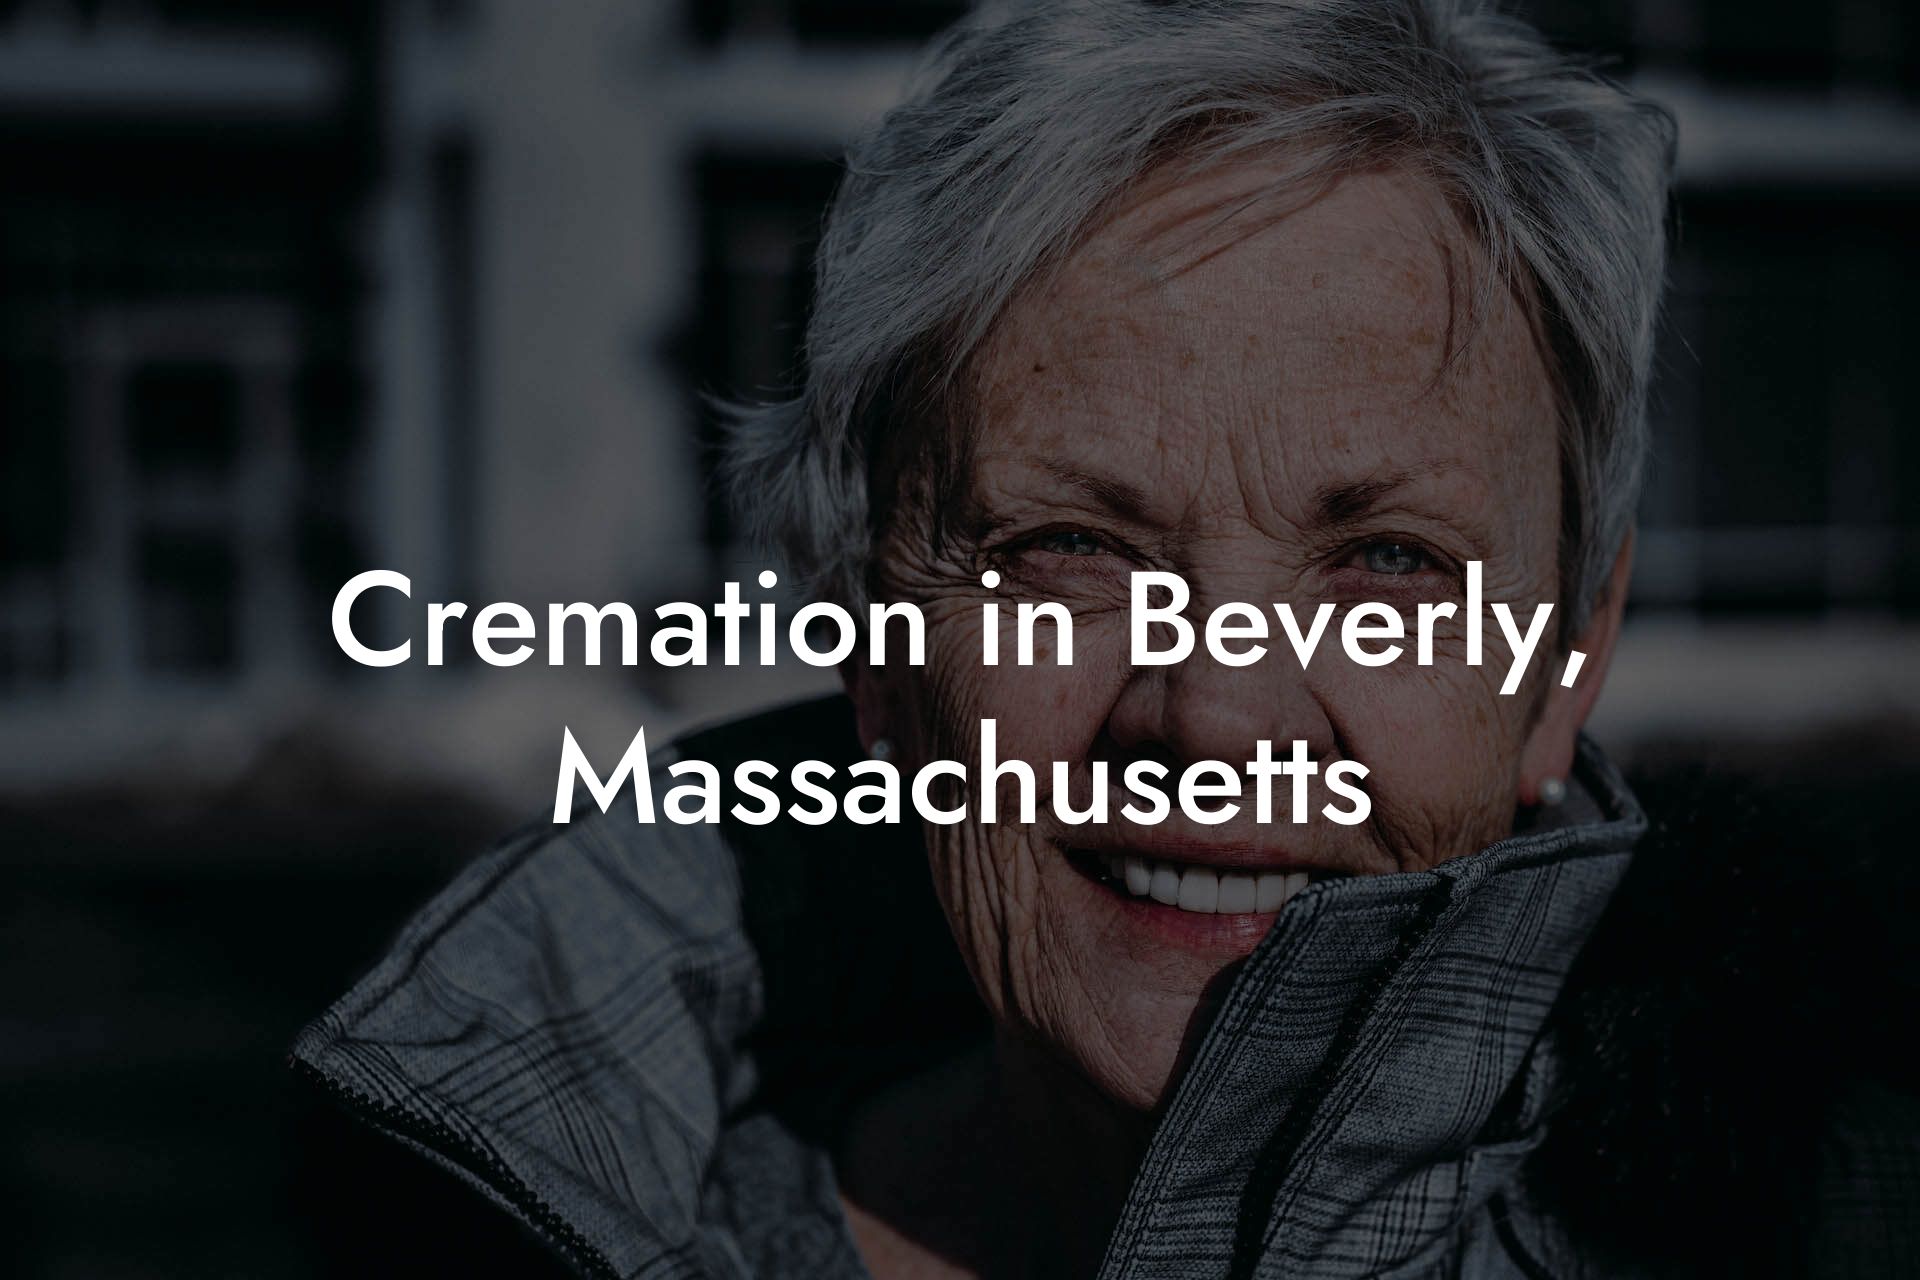 Cremation in Beverly, Massachusetts